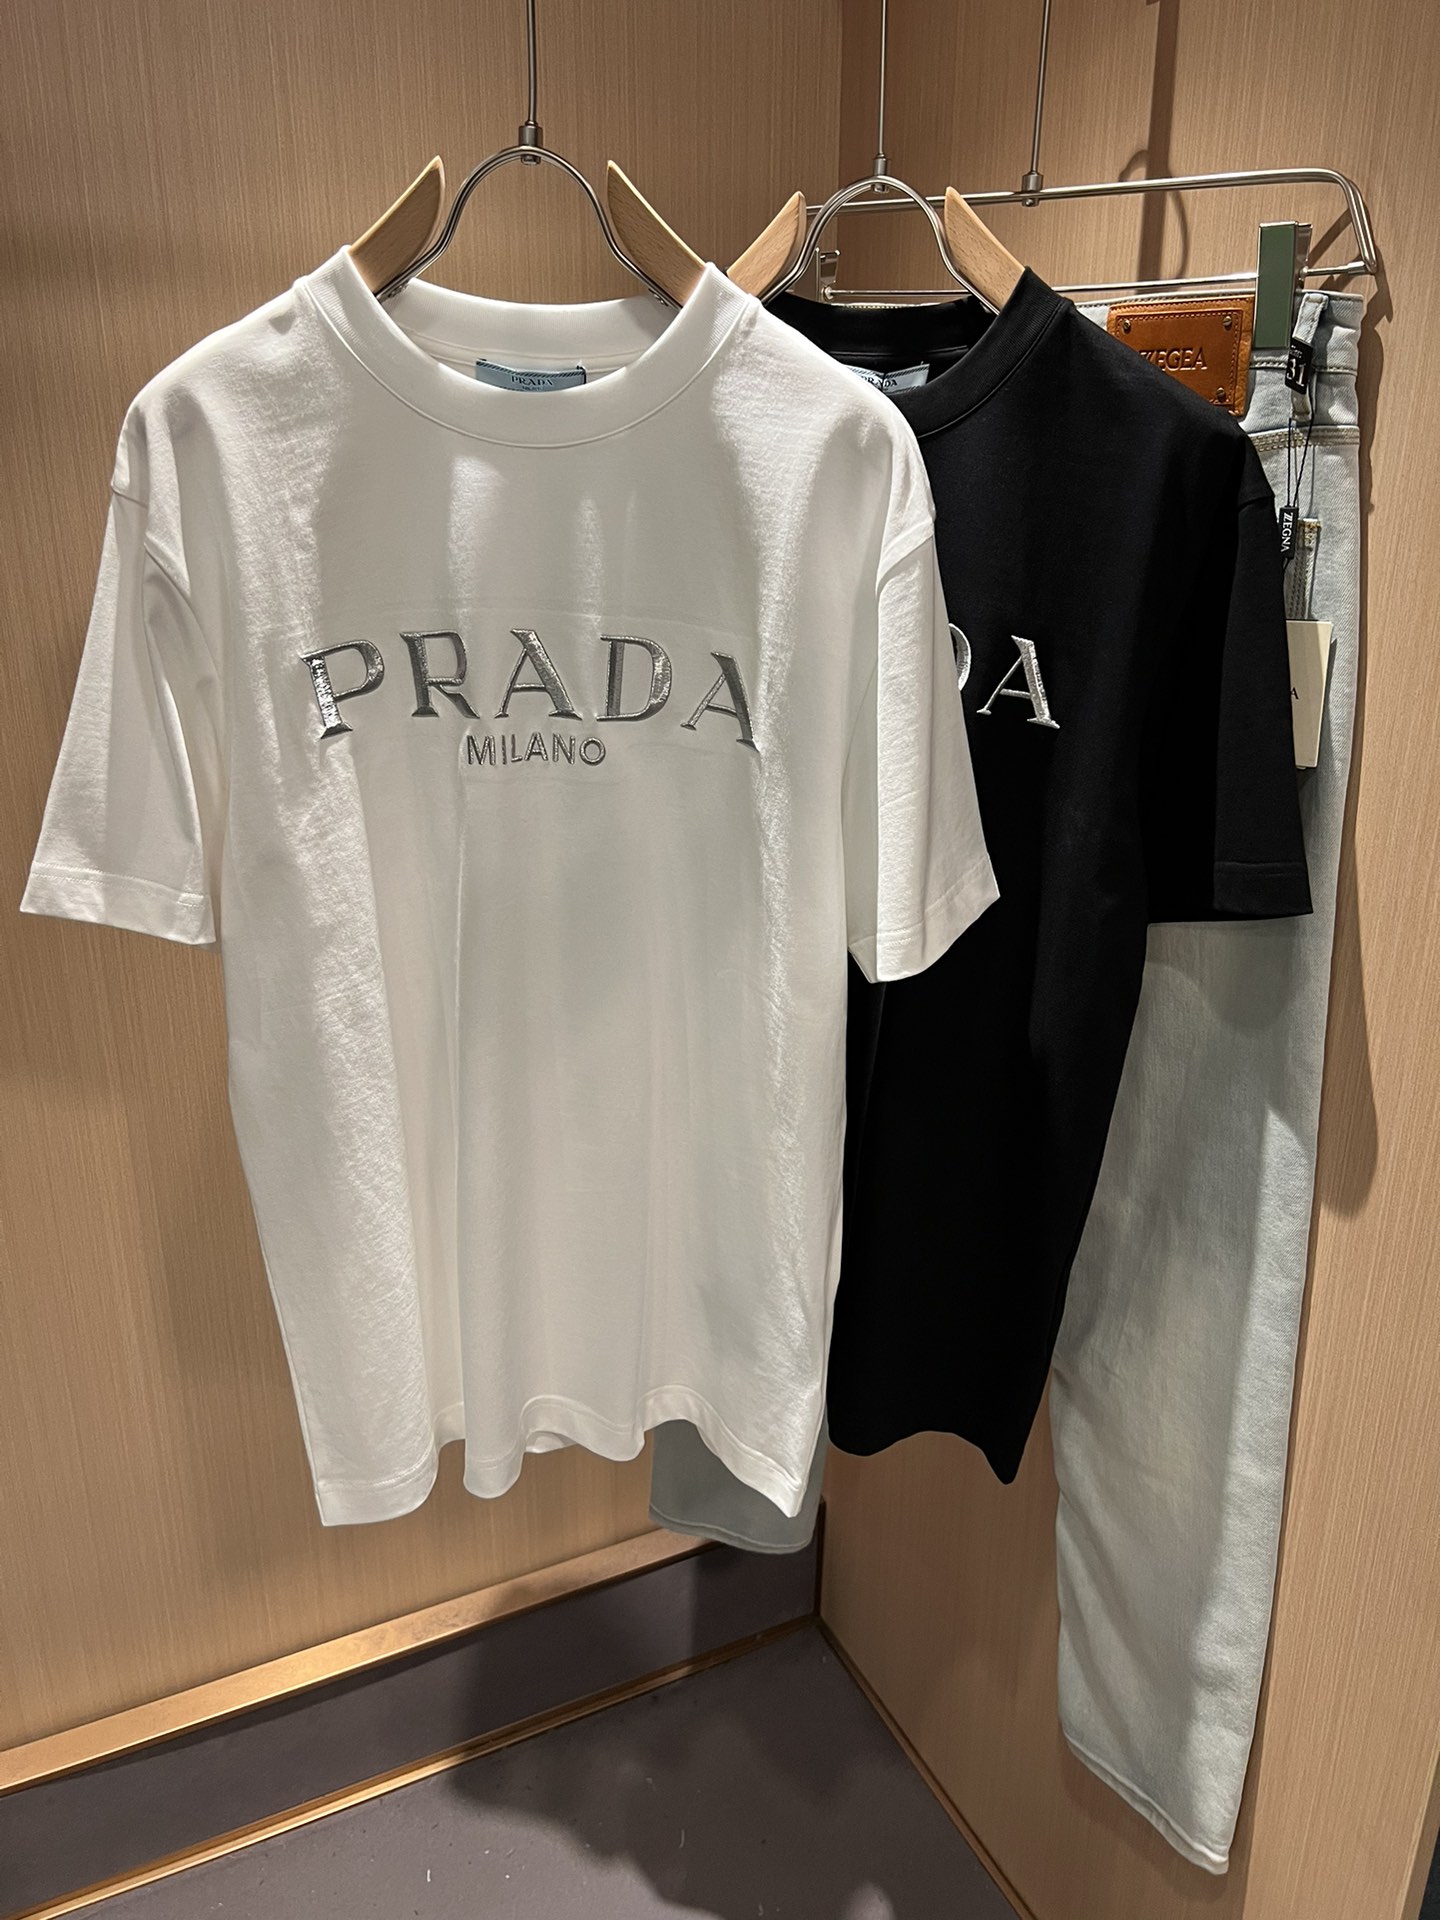 Top
 Prada Clothing T-Shirt Perfect Quality Designer Replica
 Embroidery Unisex Cotton Spring/Summer Collection Fashion Short Sleeve